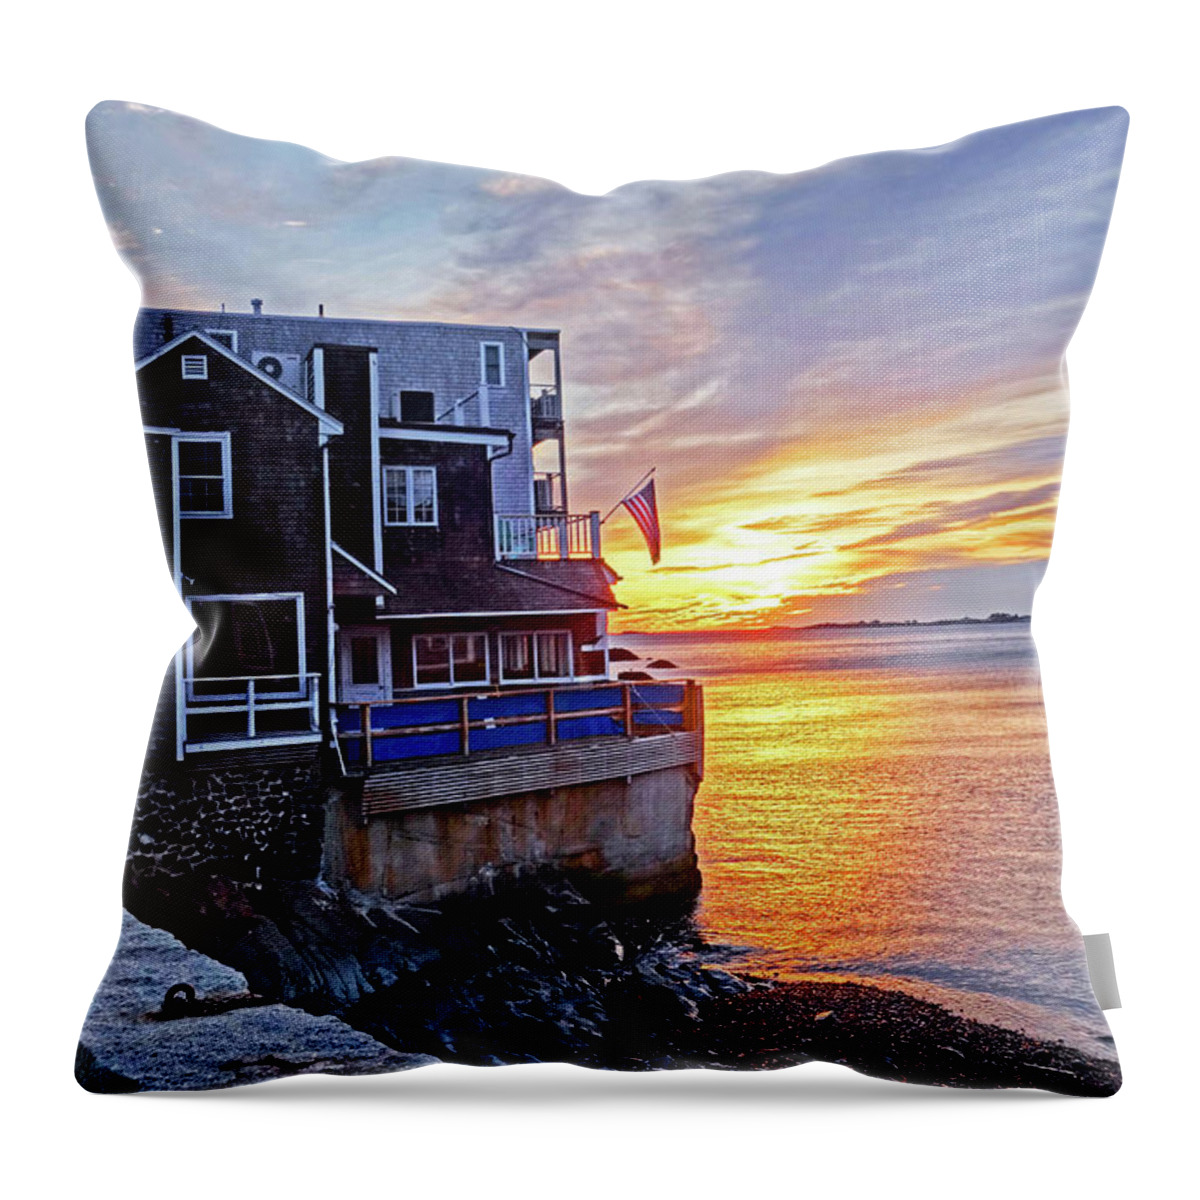 Marblehead Throw Pillow featuring the photograph Sunrise by the Barnacle Marblehead MA by Toby McGuire